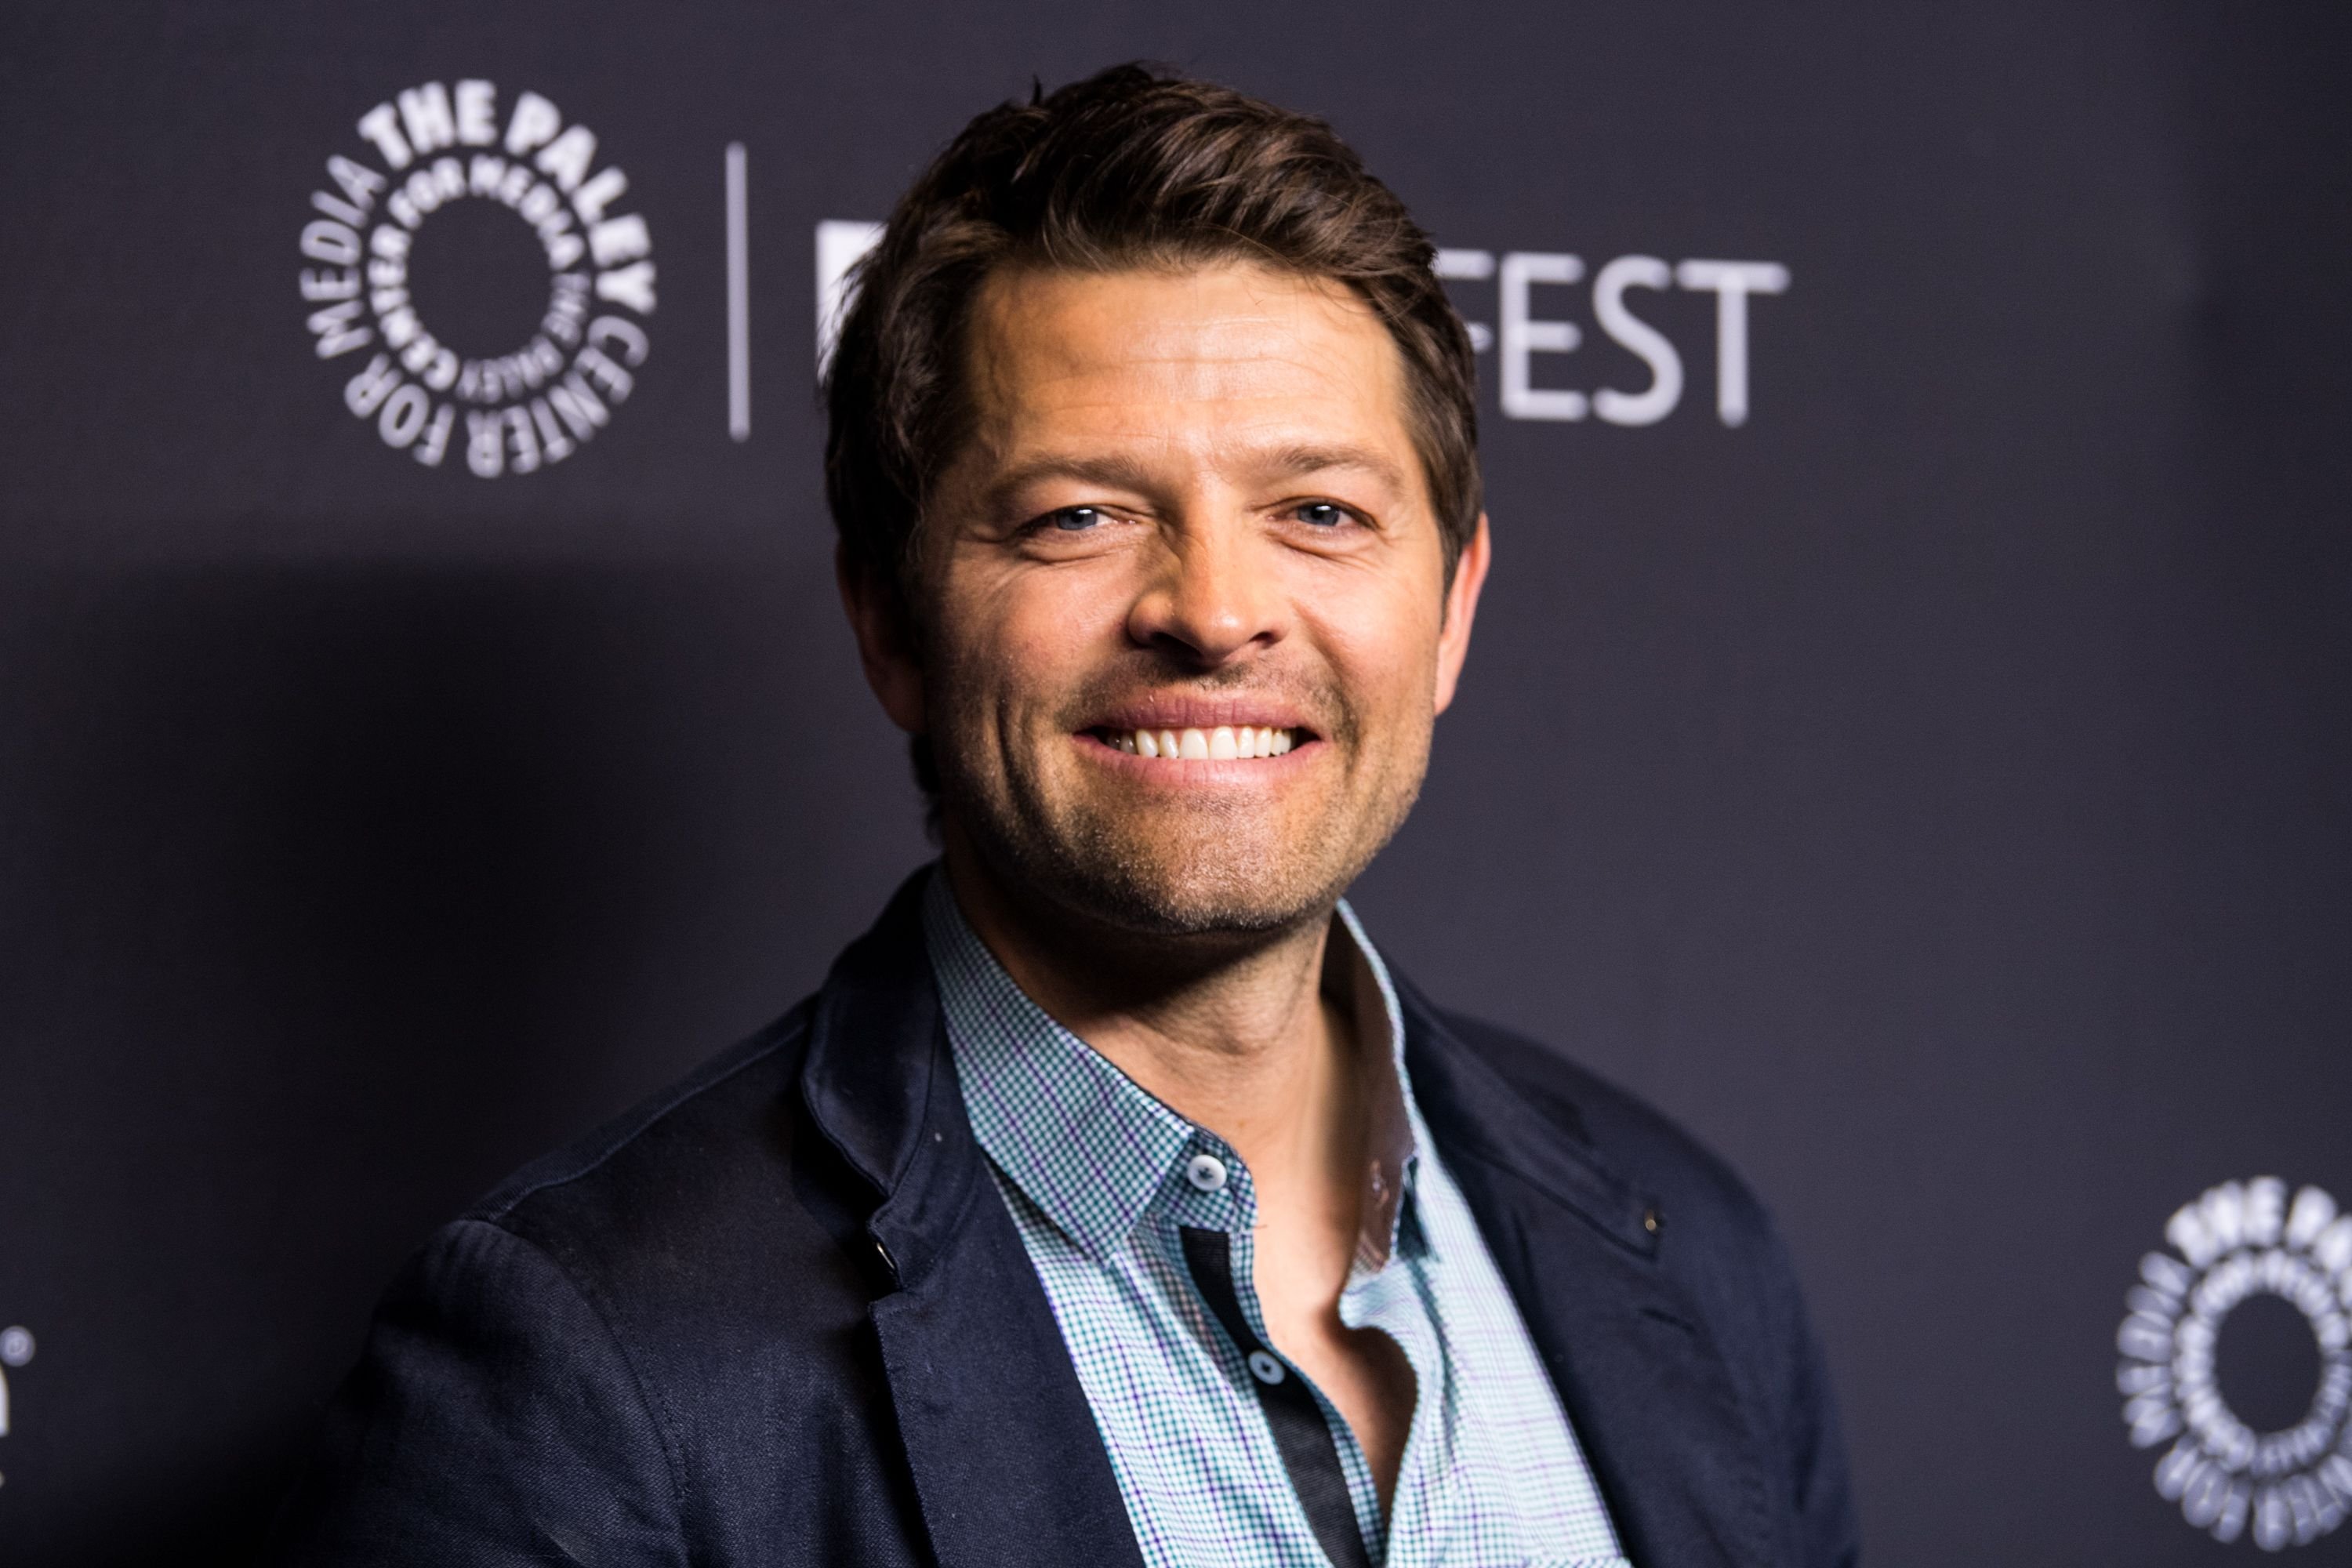 Misha Collins during the Paley Center for Media's 35th Annual PaleyFest Los Angeles "Supernatural" at Dolby Theatre on March 20, 2018 in Hollywood, California. | Source: Getty Images